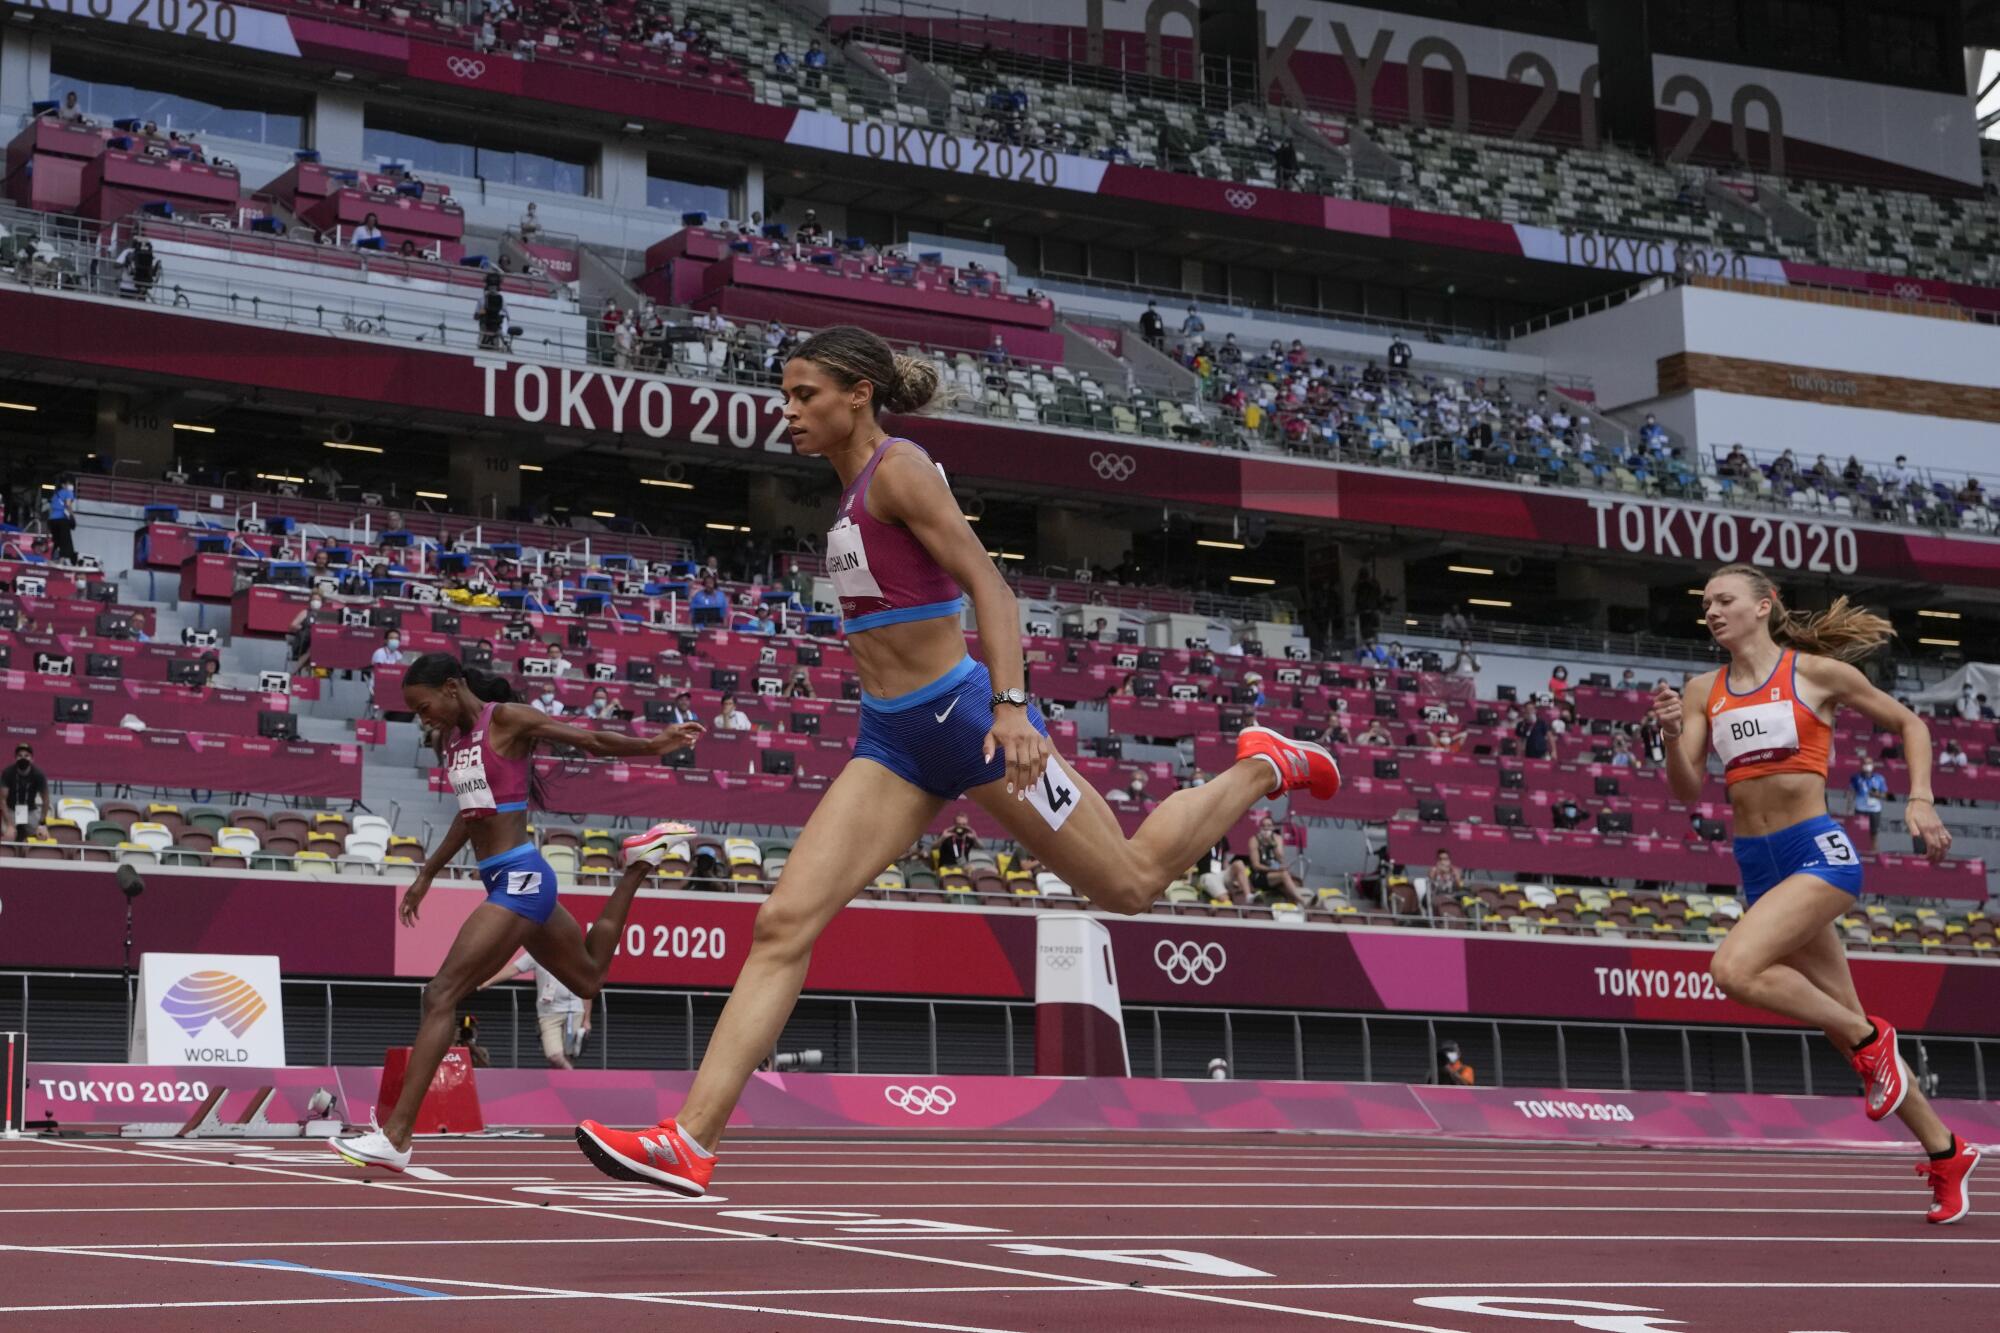 Sydney McLaughlin crosses the finish line to win the 400-meter race at the Tokyo Olympics.